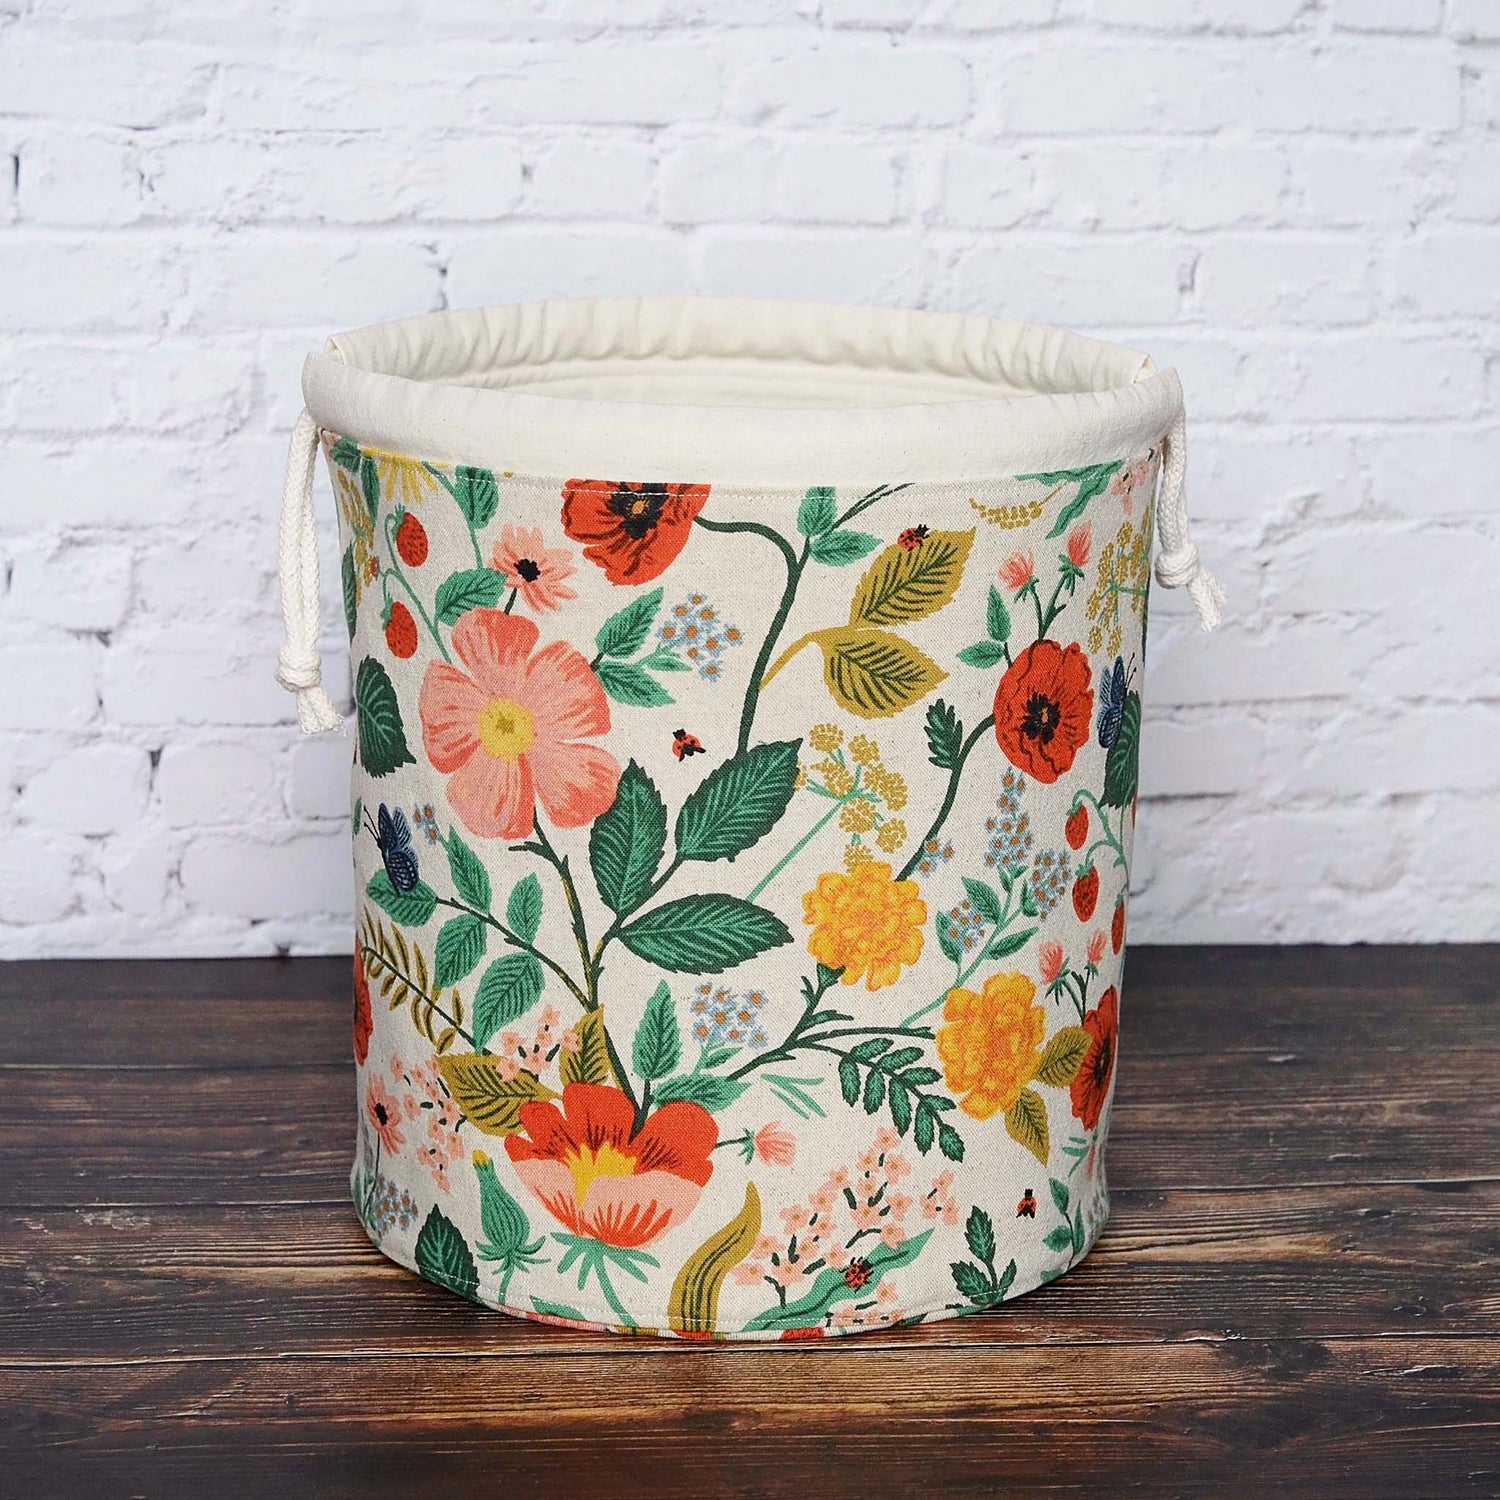 Floral canvas knitting bag with poppies.  It has a drawstring closure and a quilted bottom for stability.  Made in Canada by Yellow Petal Handmade. 